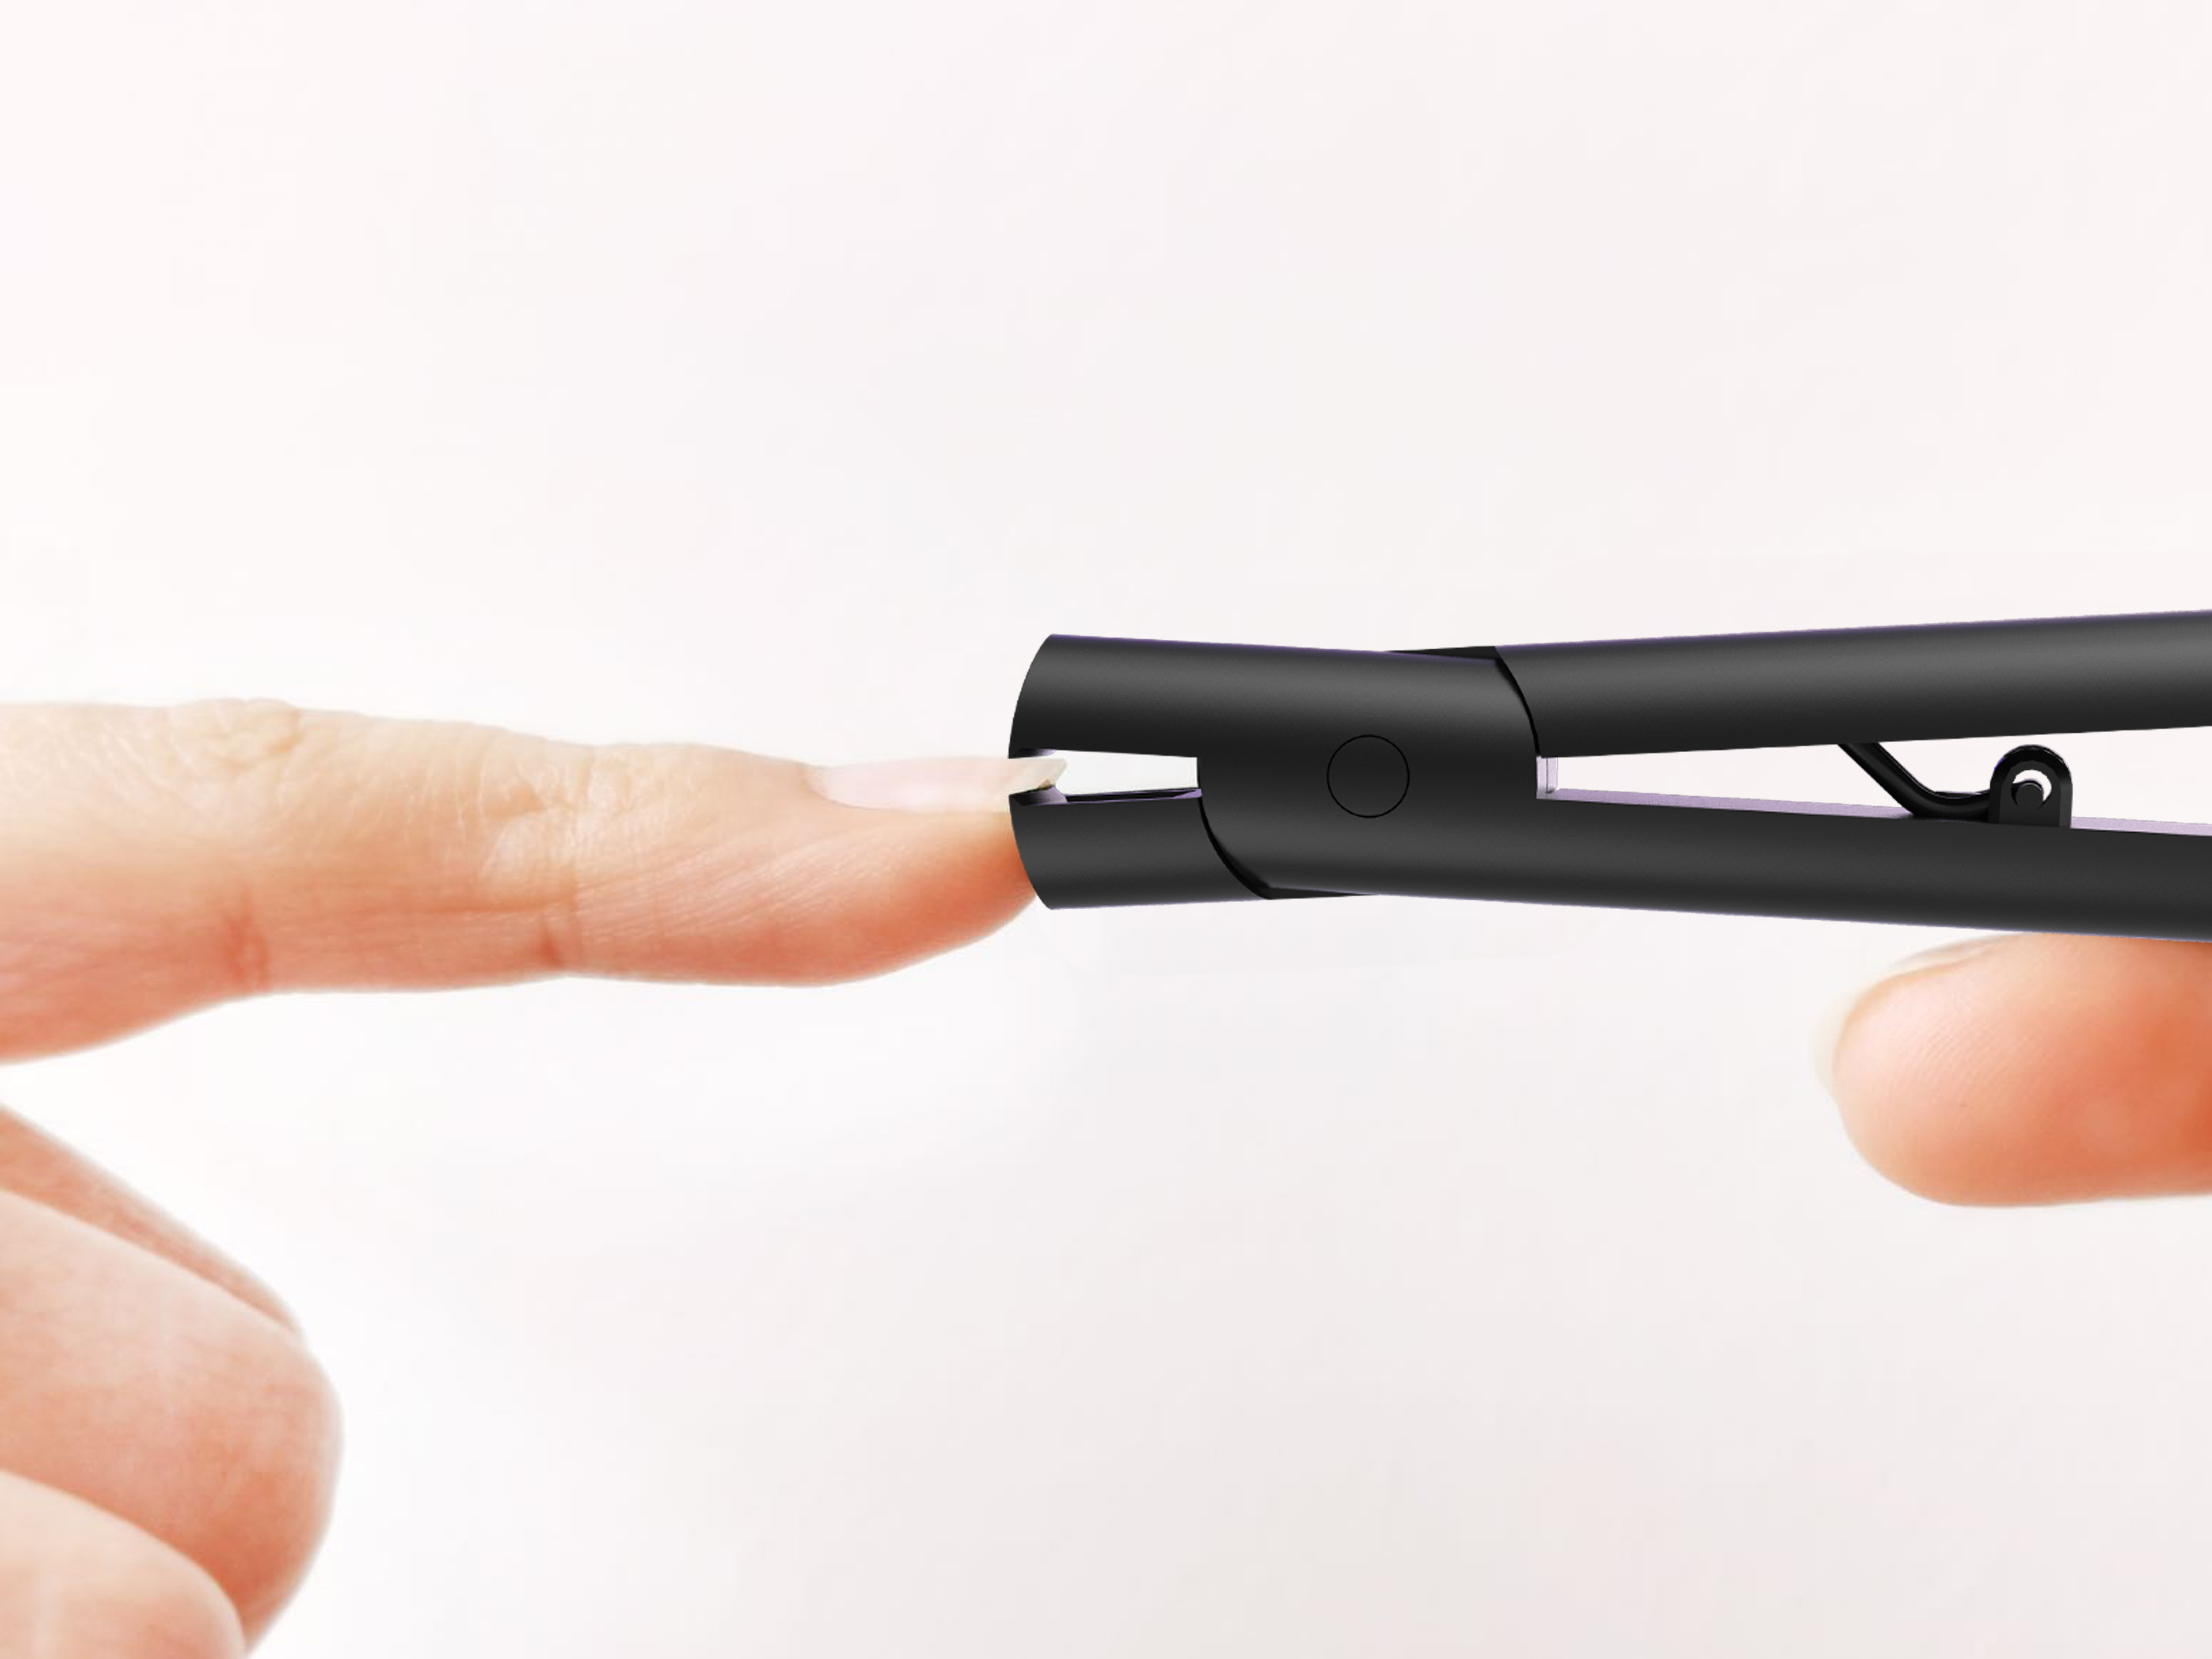 Nail clipper that prevents over-cutting of nails